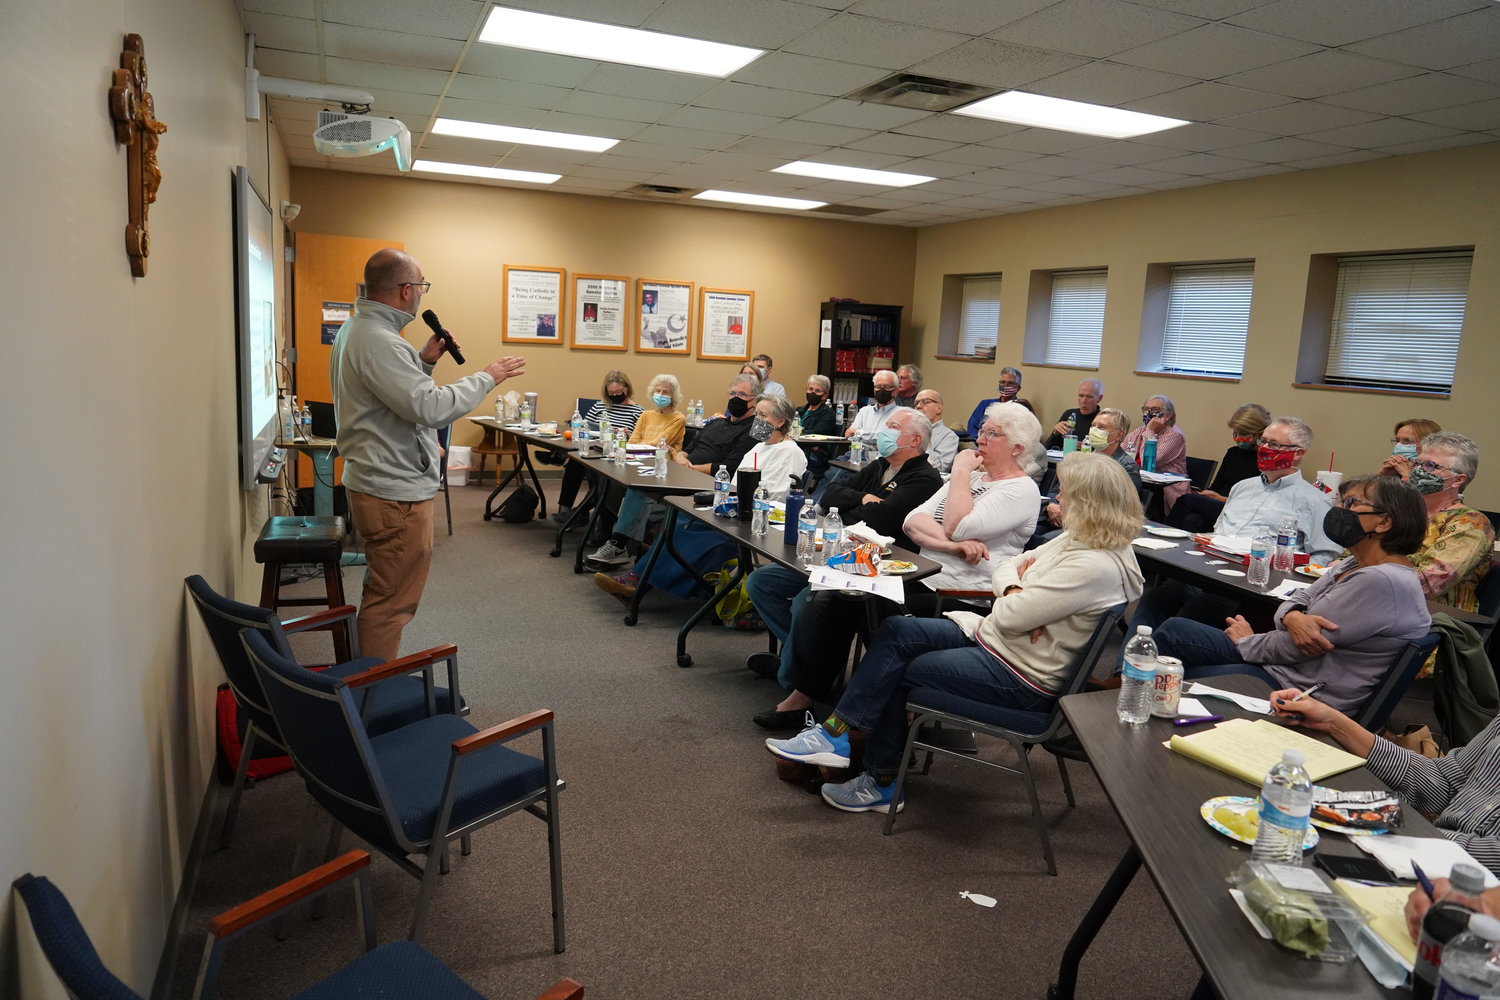 Dan Lester, executive director of Catholic Charities of Central and Northern Missouri, addresses volunteers during an orientation session for community sponsorship of refugees.